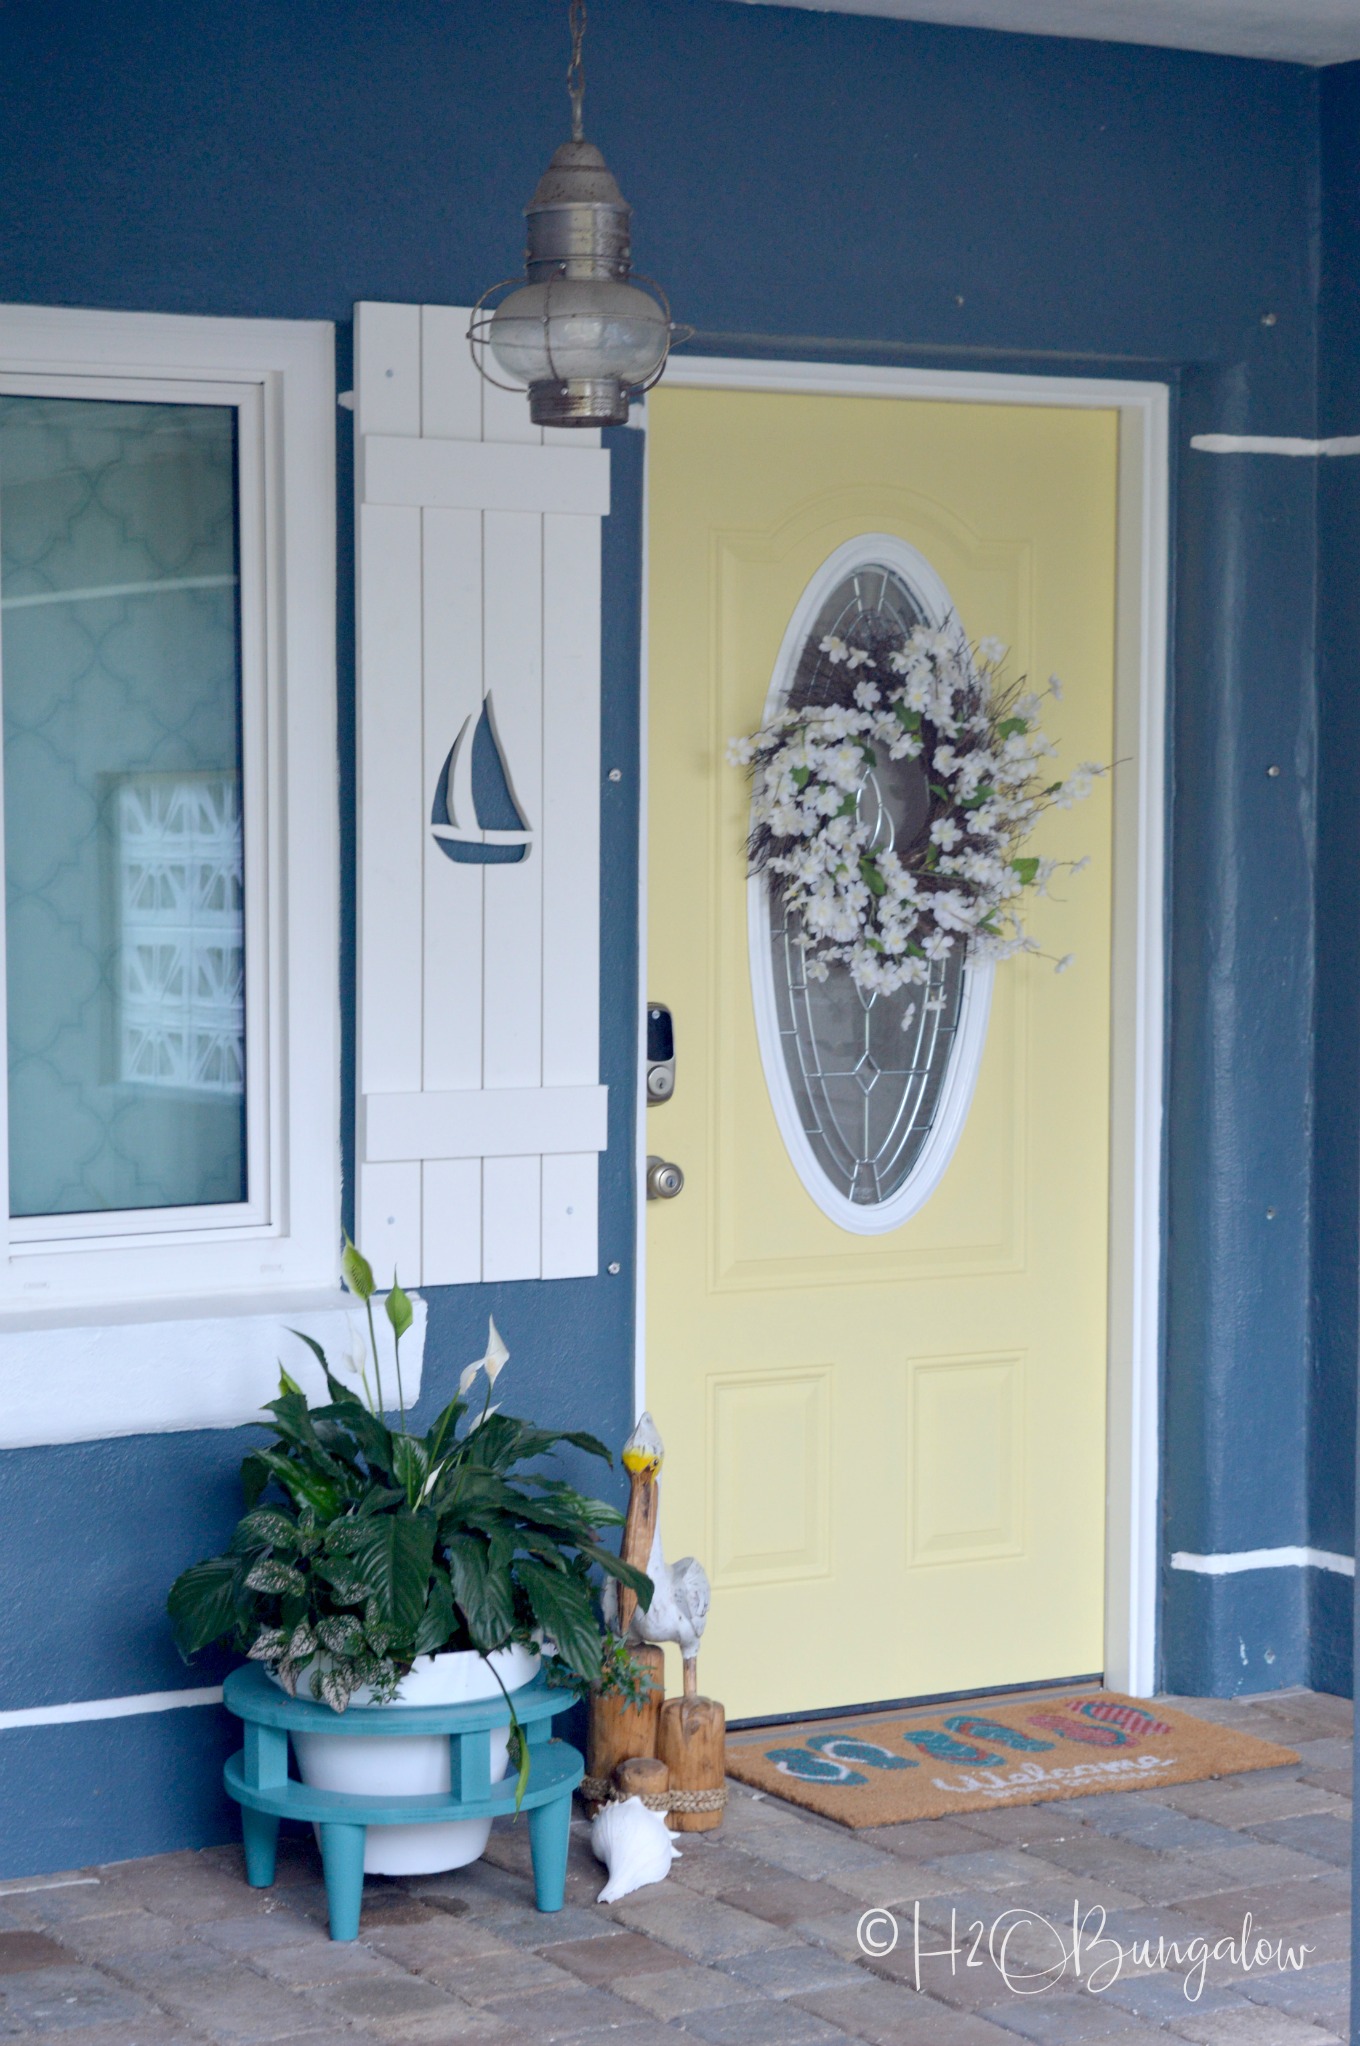 Video and tutorial on how to make exterior DIY shutters with sailboat cutouts from long lasting pvc. Download my free sailboat cutout pattern or see my tips to make your own decorative shutter cutouts. Exterior decorative shutters with designs cut out add charm and curb appeal and are easy to make! 